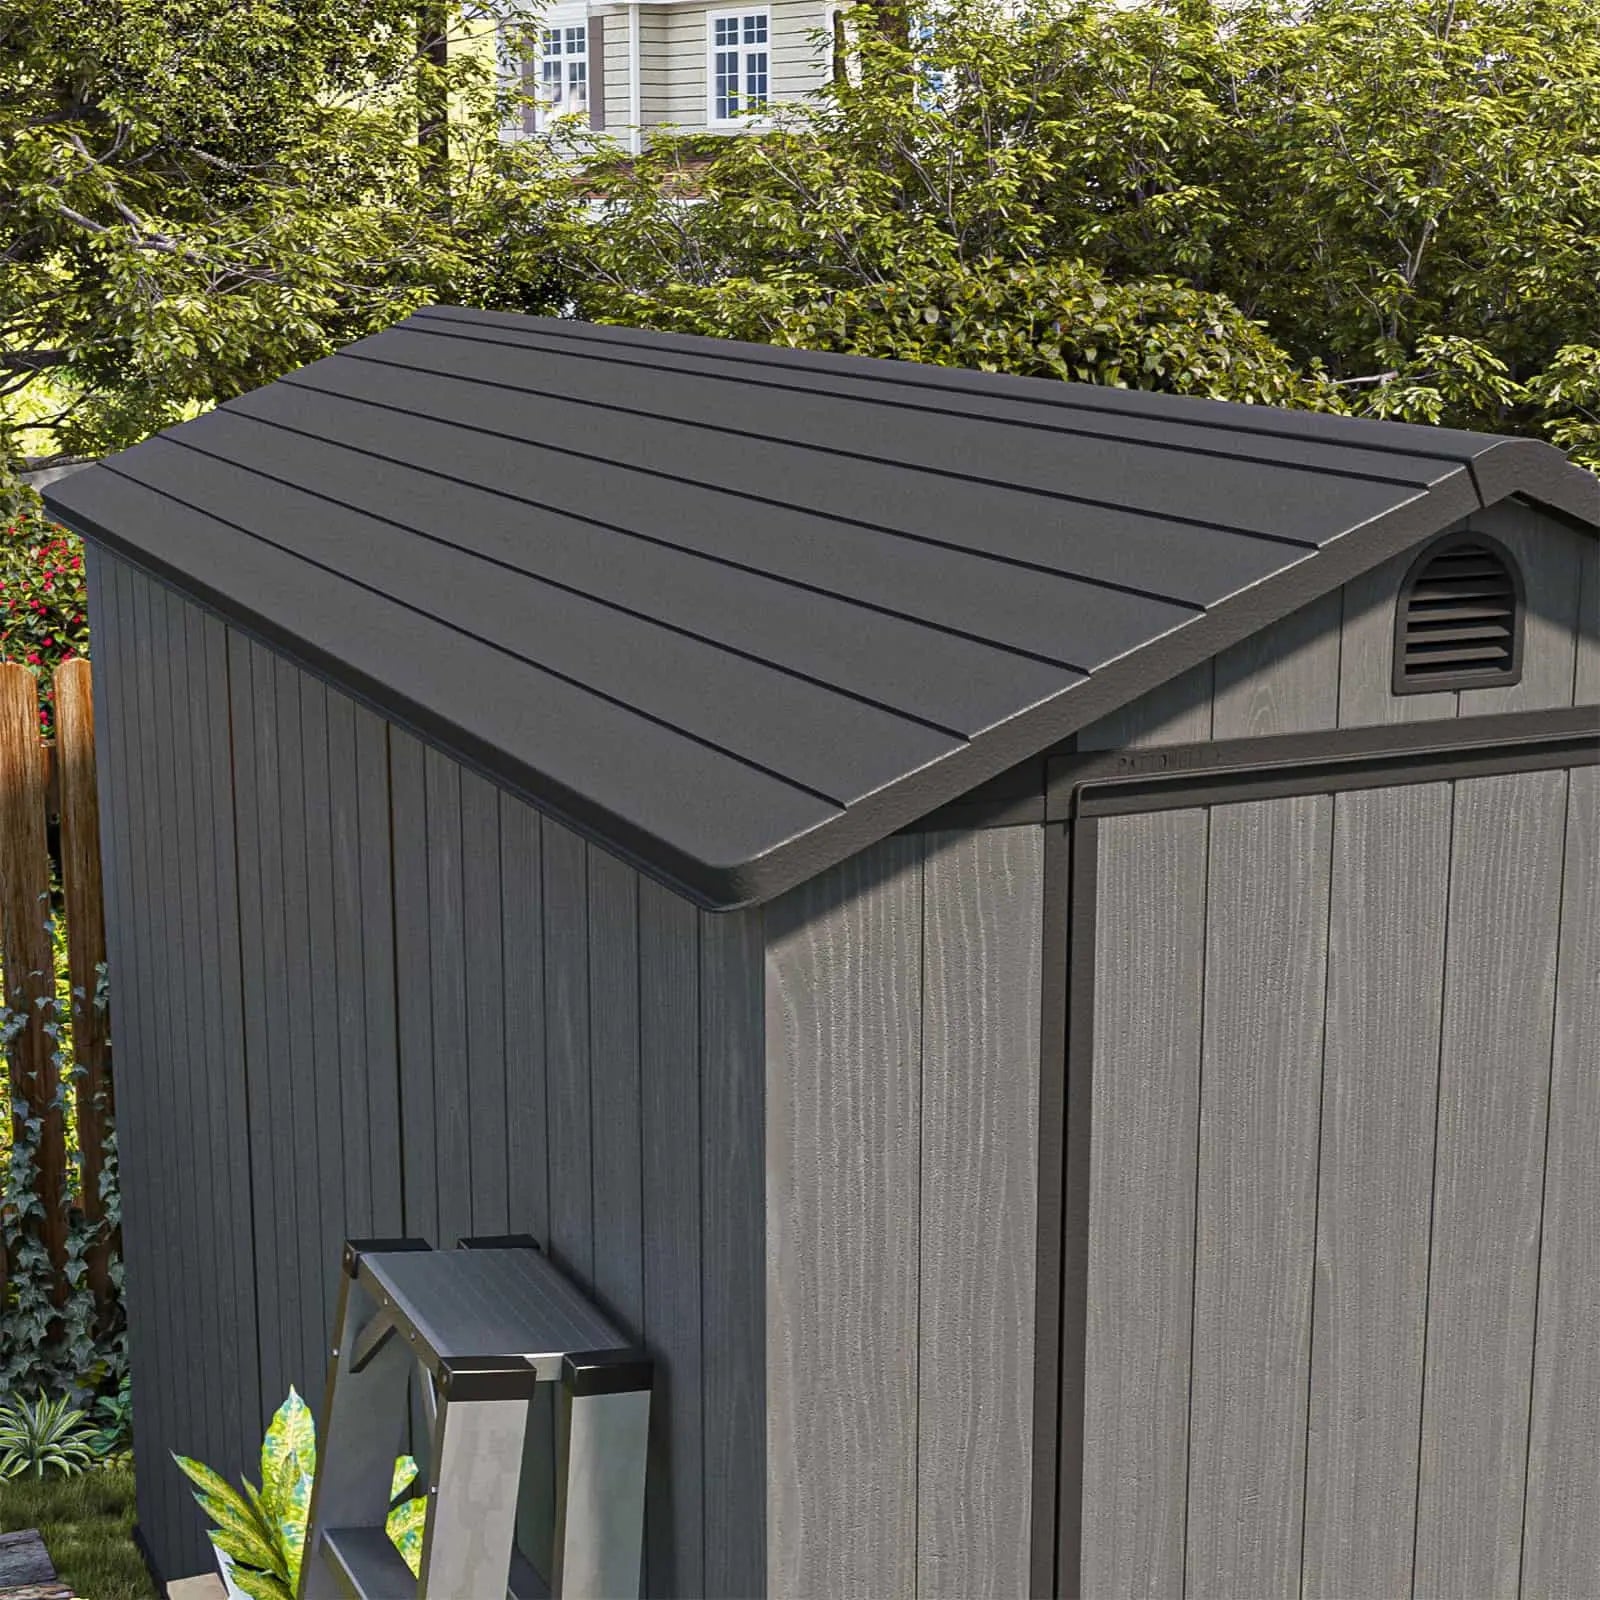 Patiowell 4x8 Plastic Storage Shed Pro-Roof